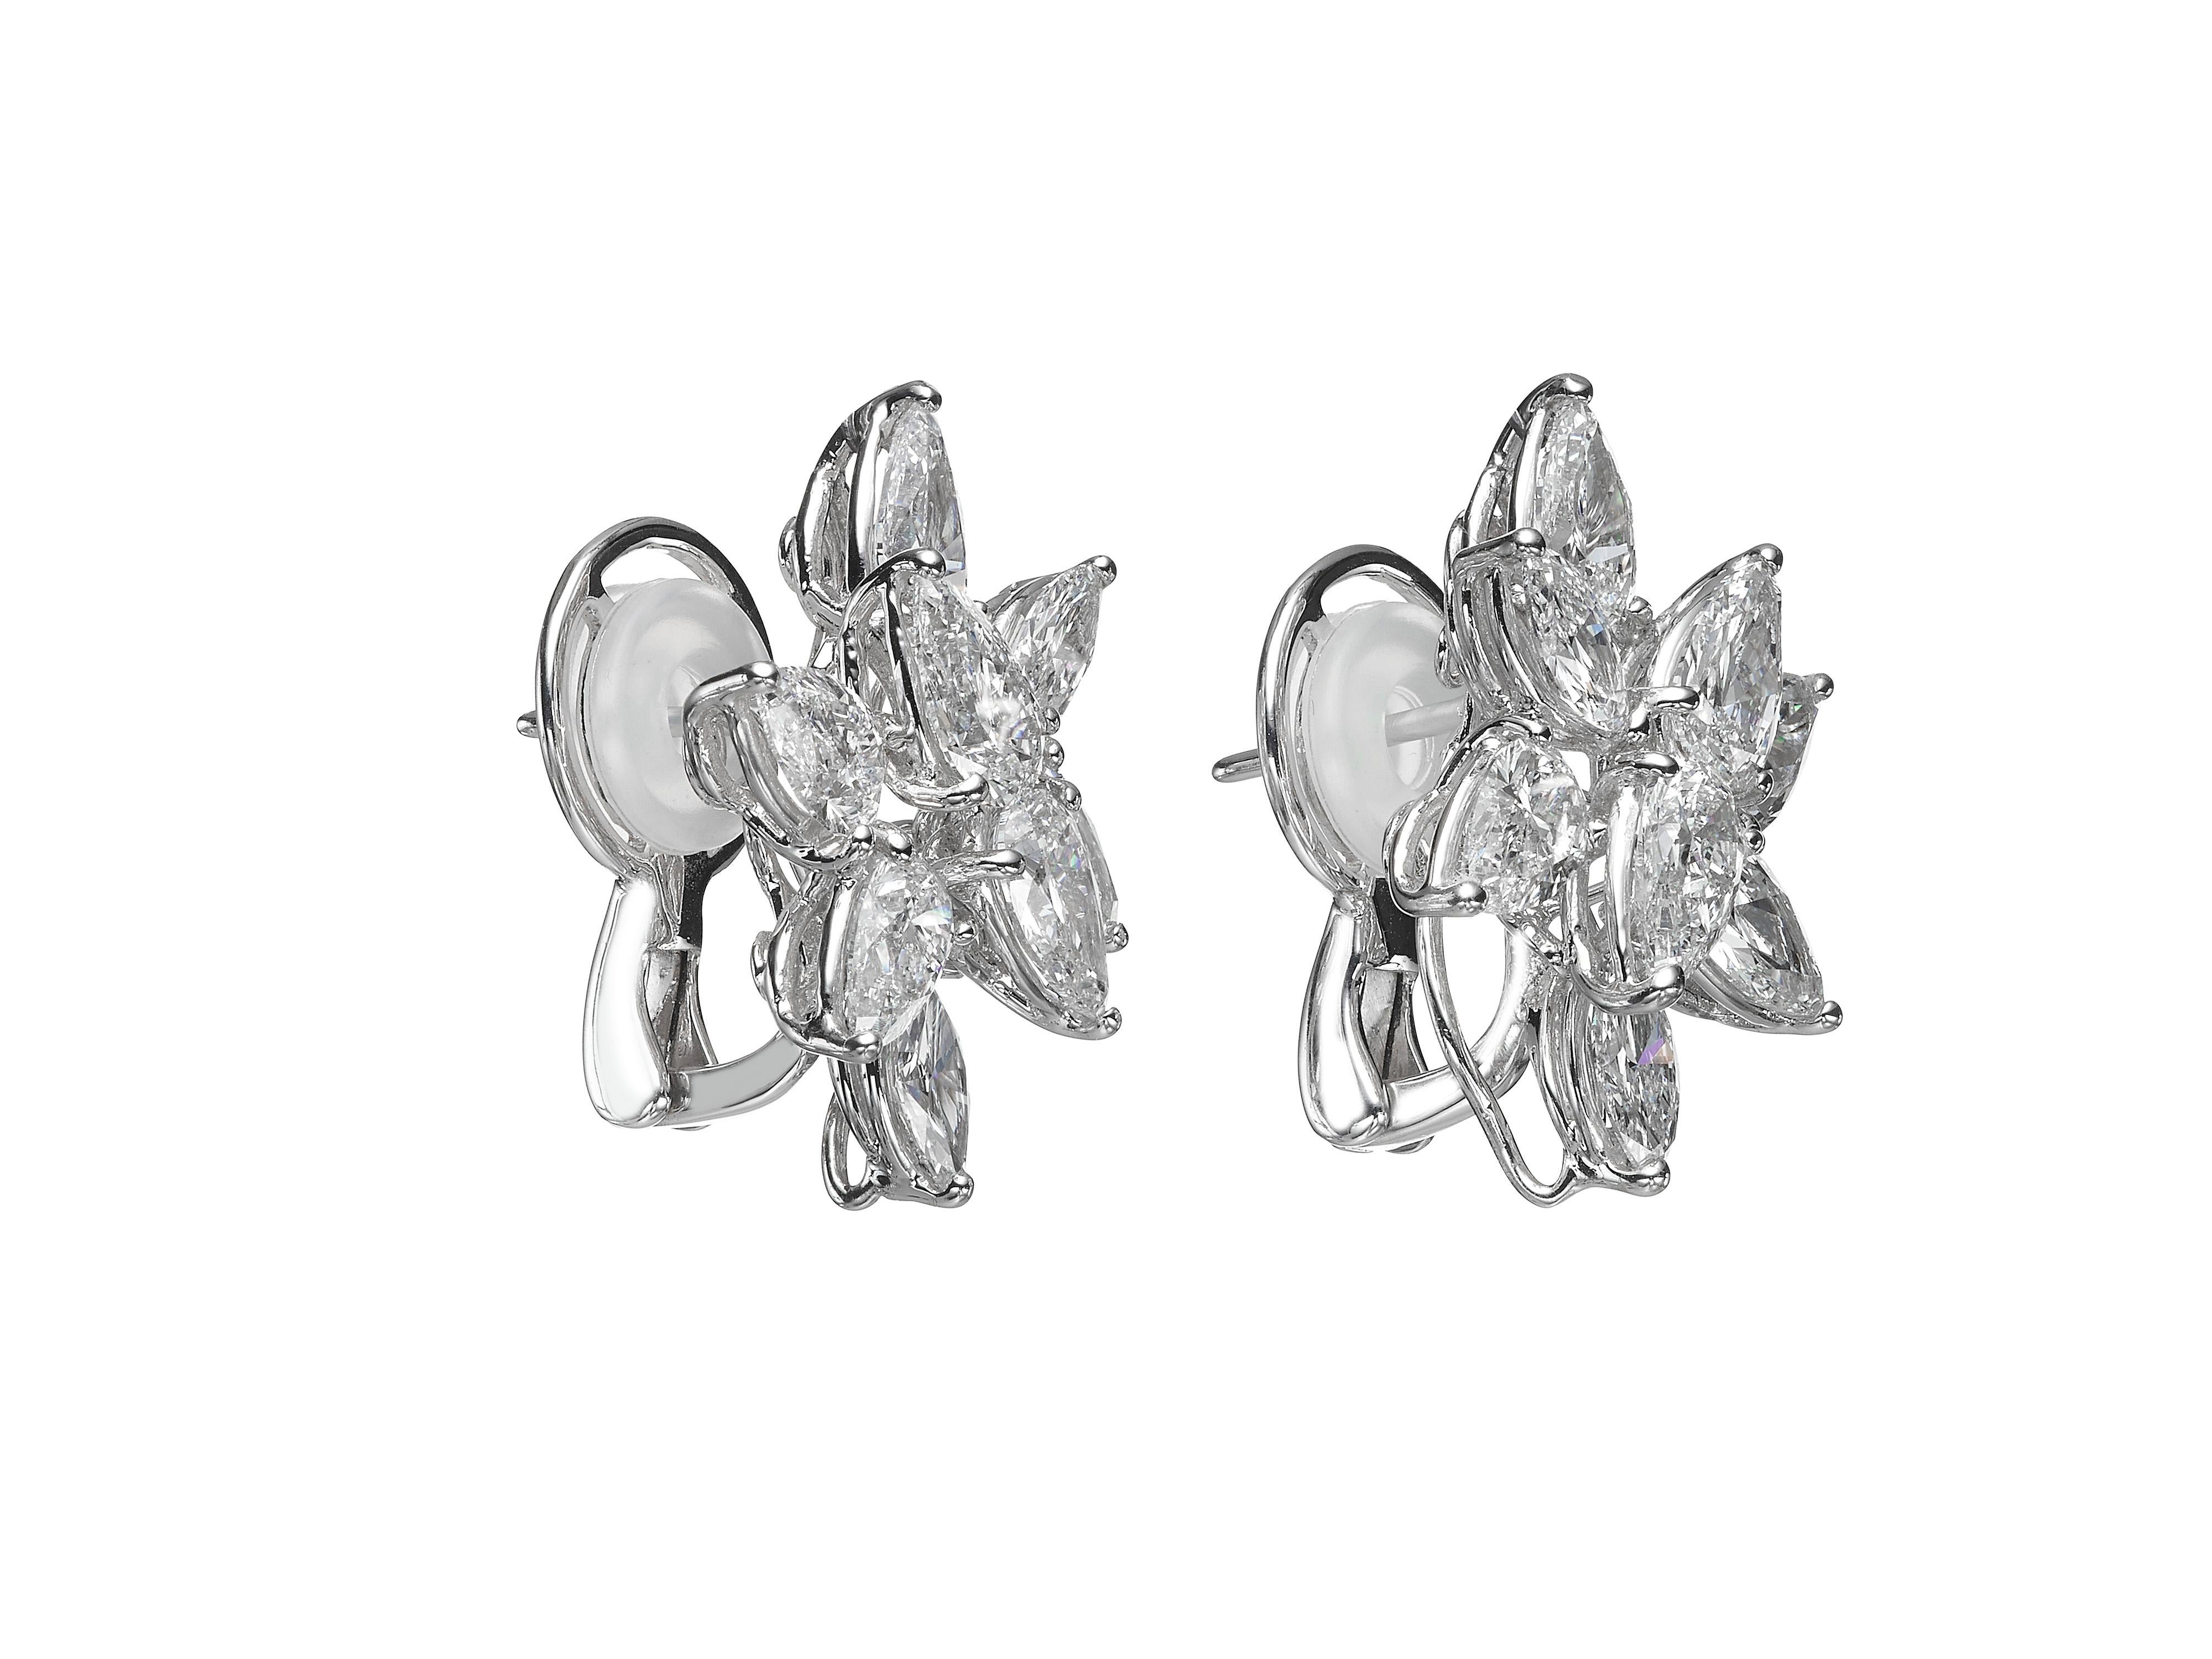 Butani's diamond stud earrings are set with a brilliant cluster of pear-shaped and marquise diamonds at varying angles, allowing the diamonds to capture light from every direction.  The earrings feature 12 pear-shaped diamonds weighing a total of